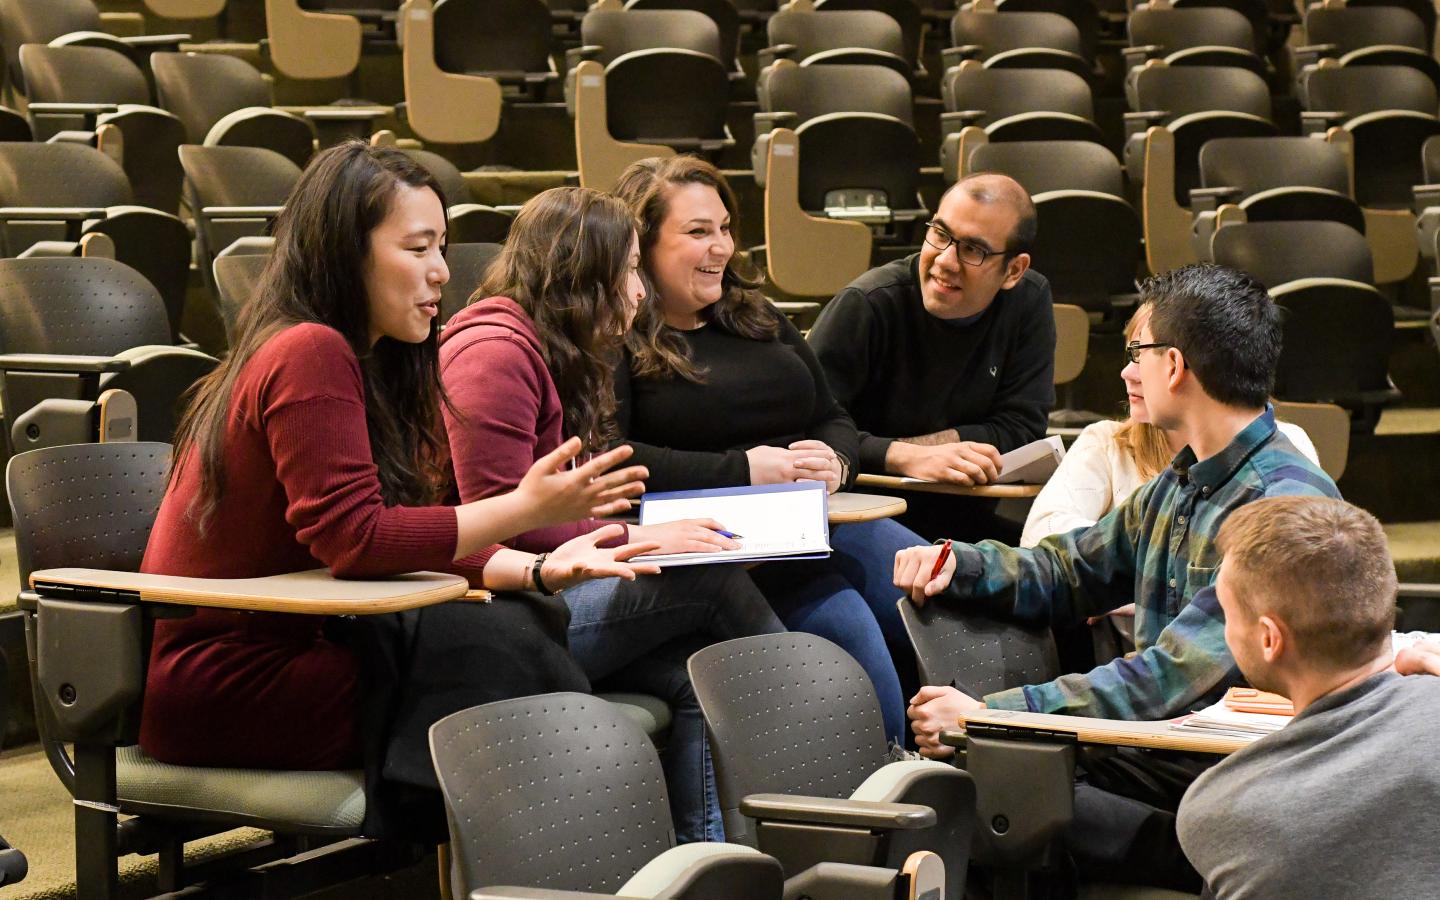 Circle of seven students sit conversing in auditorium seating